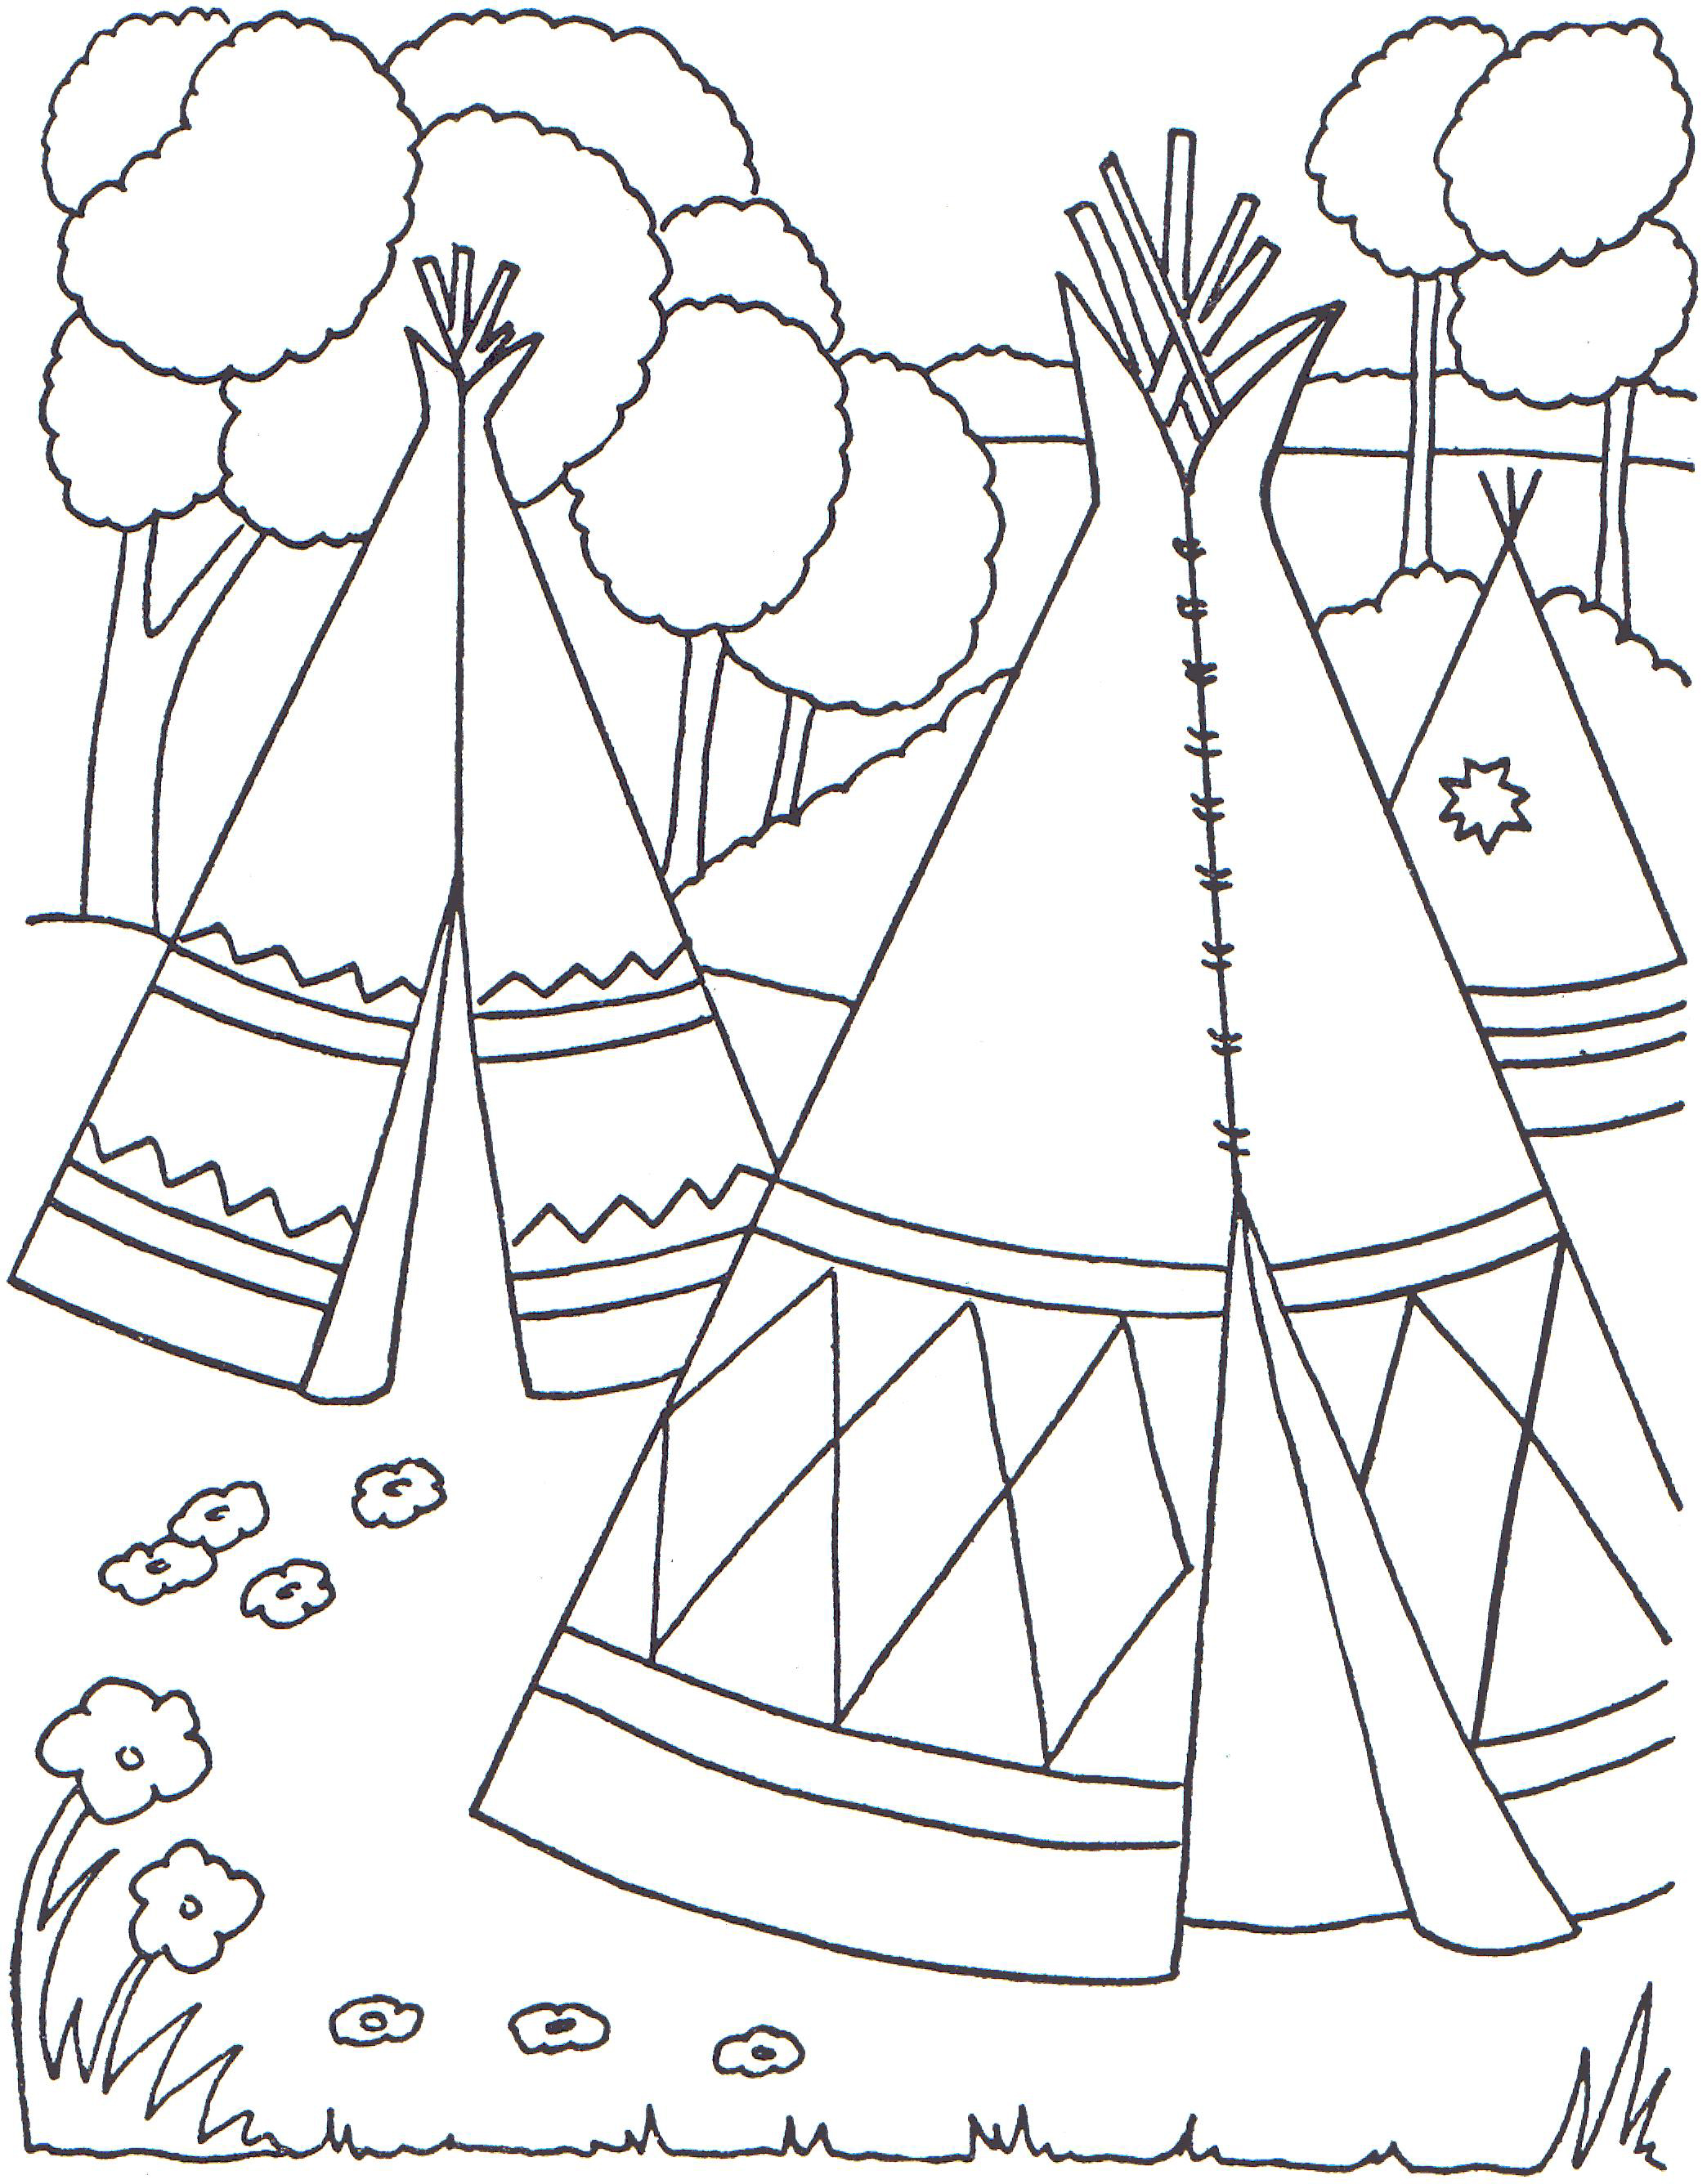 the-best-free-teepee-coloring-page-images-download-from-37-free